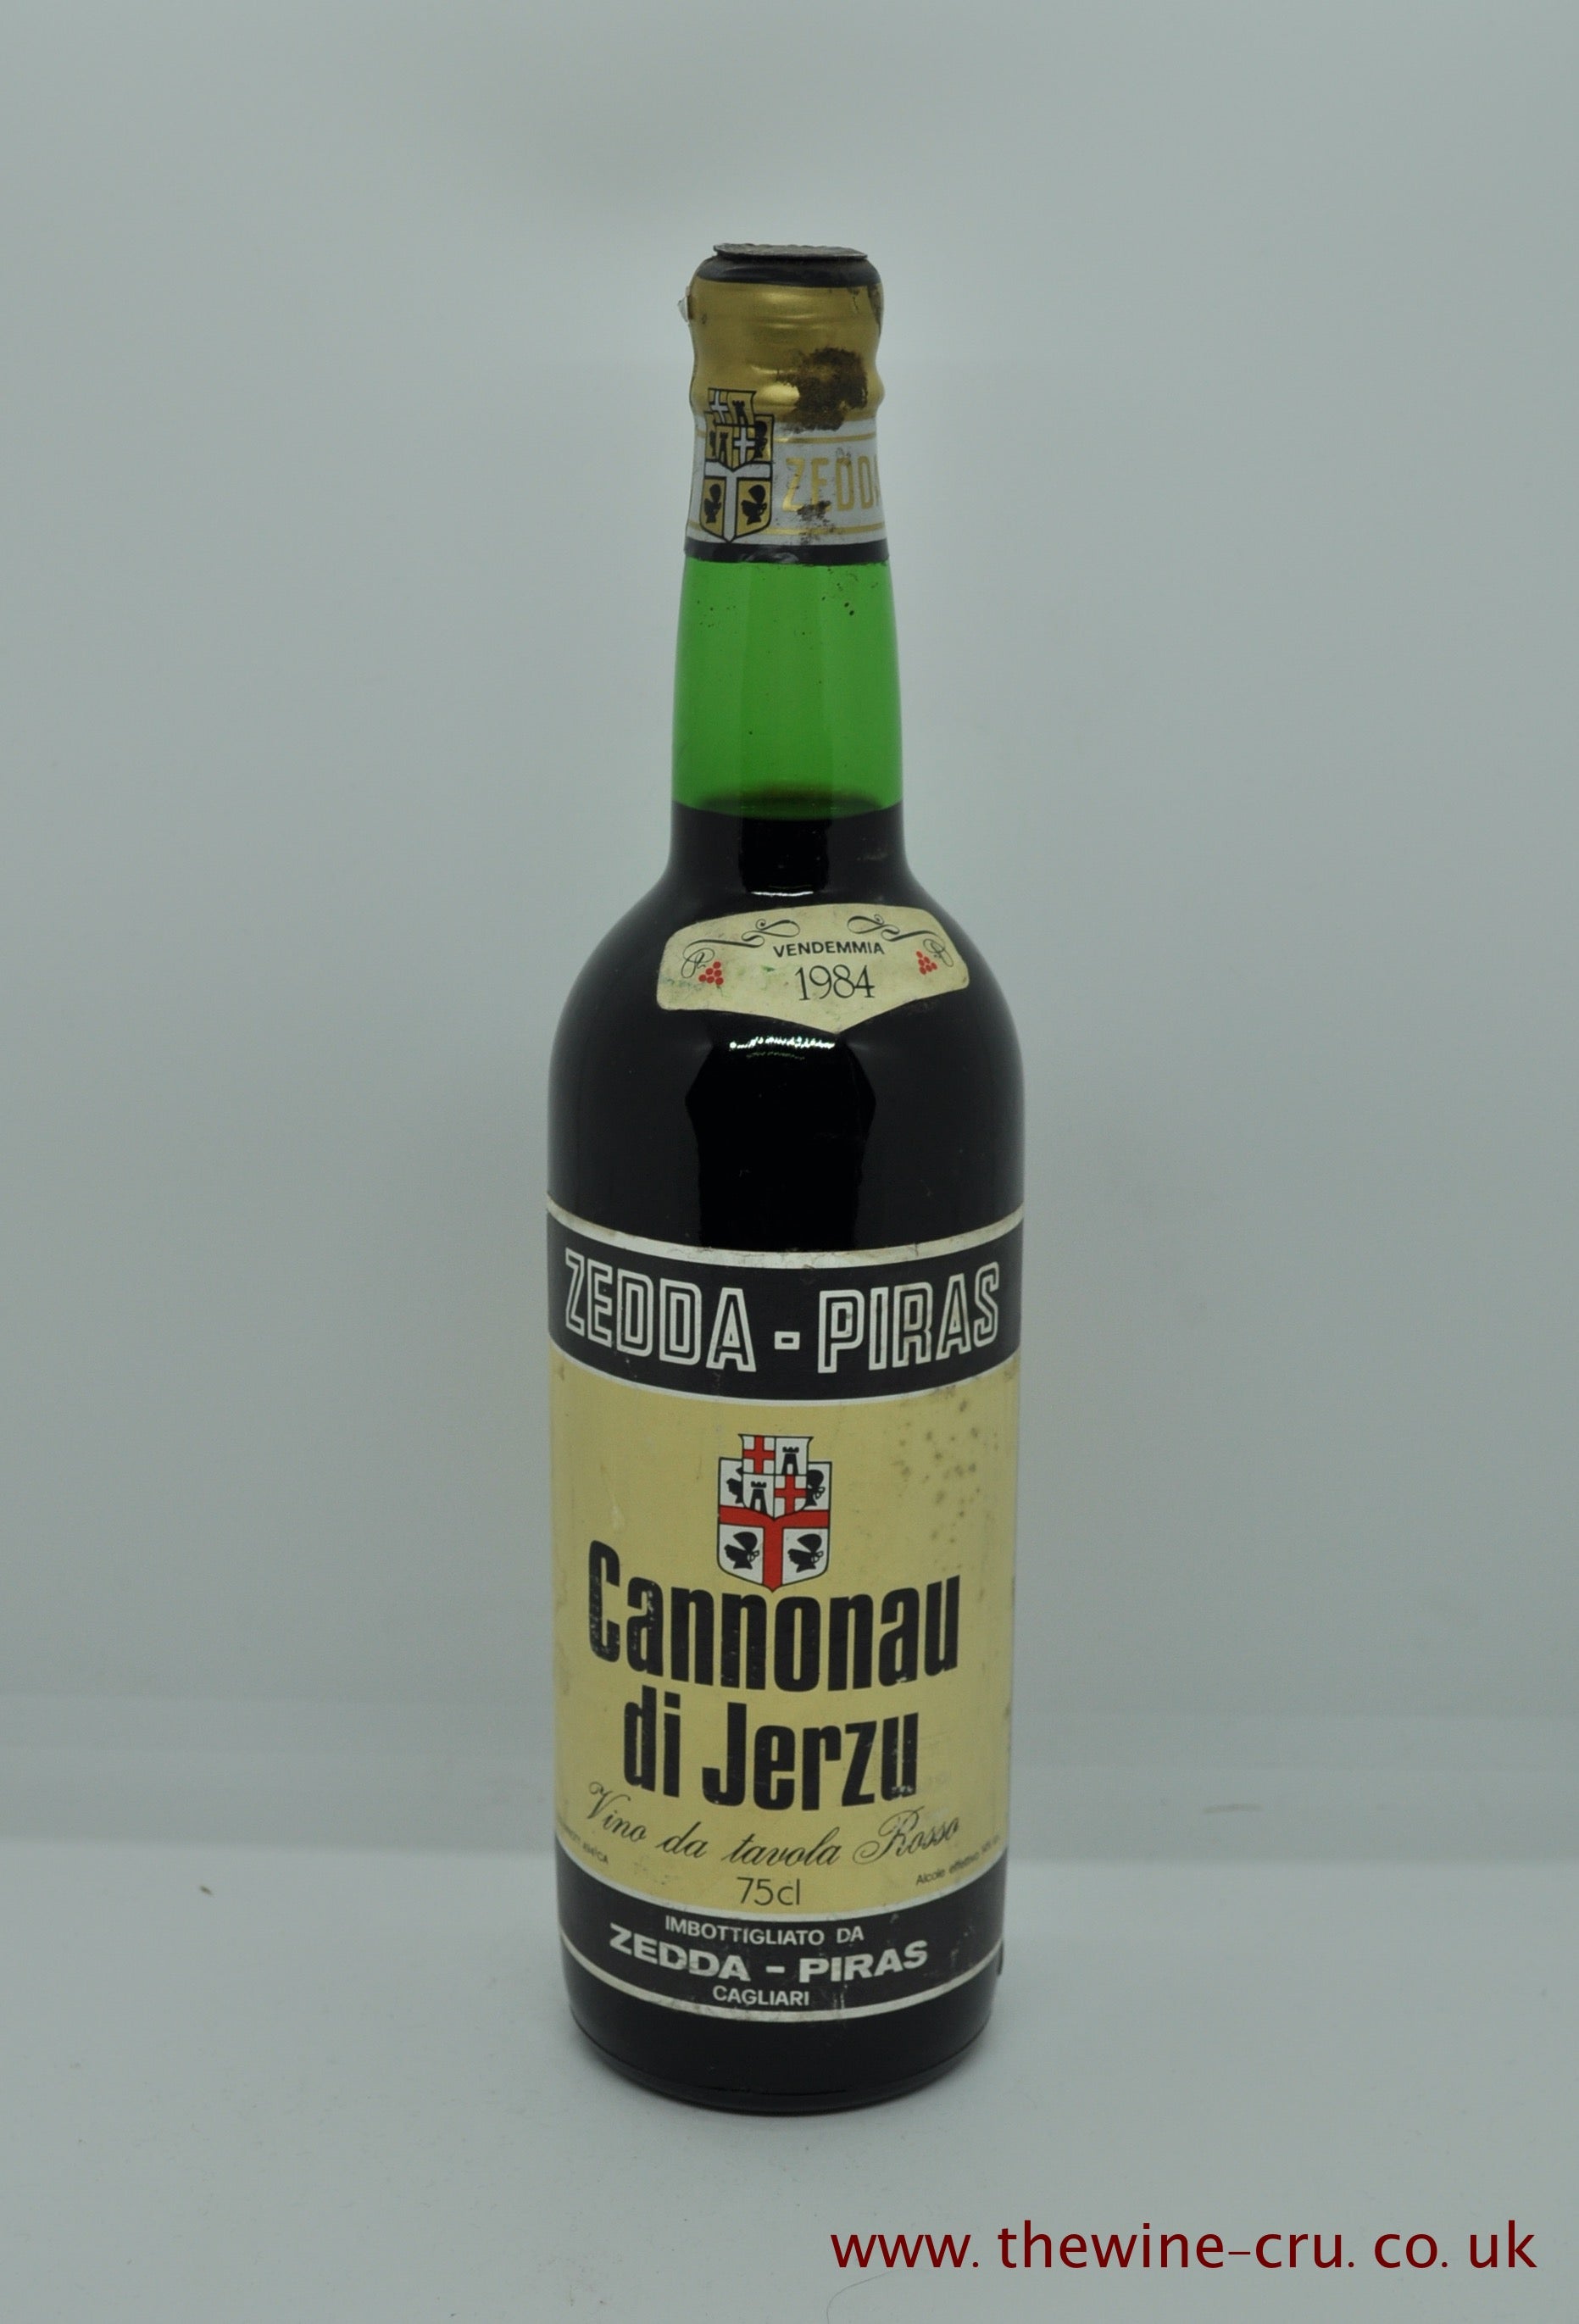 A single bottle of 1984 vintage red wine. Cannonau Di Jerzu Zedda Piras. Italy, Sardinia.. The bottle is in good condition with the wine level into neck. Immediate delivery. Free local delivery. Gift wrapping available.